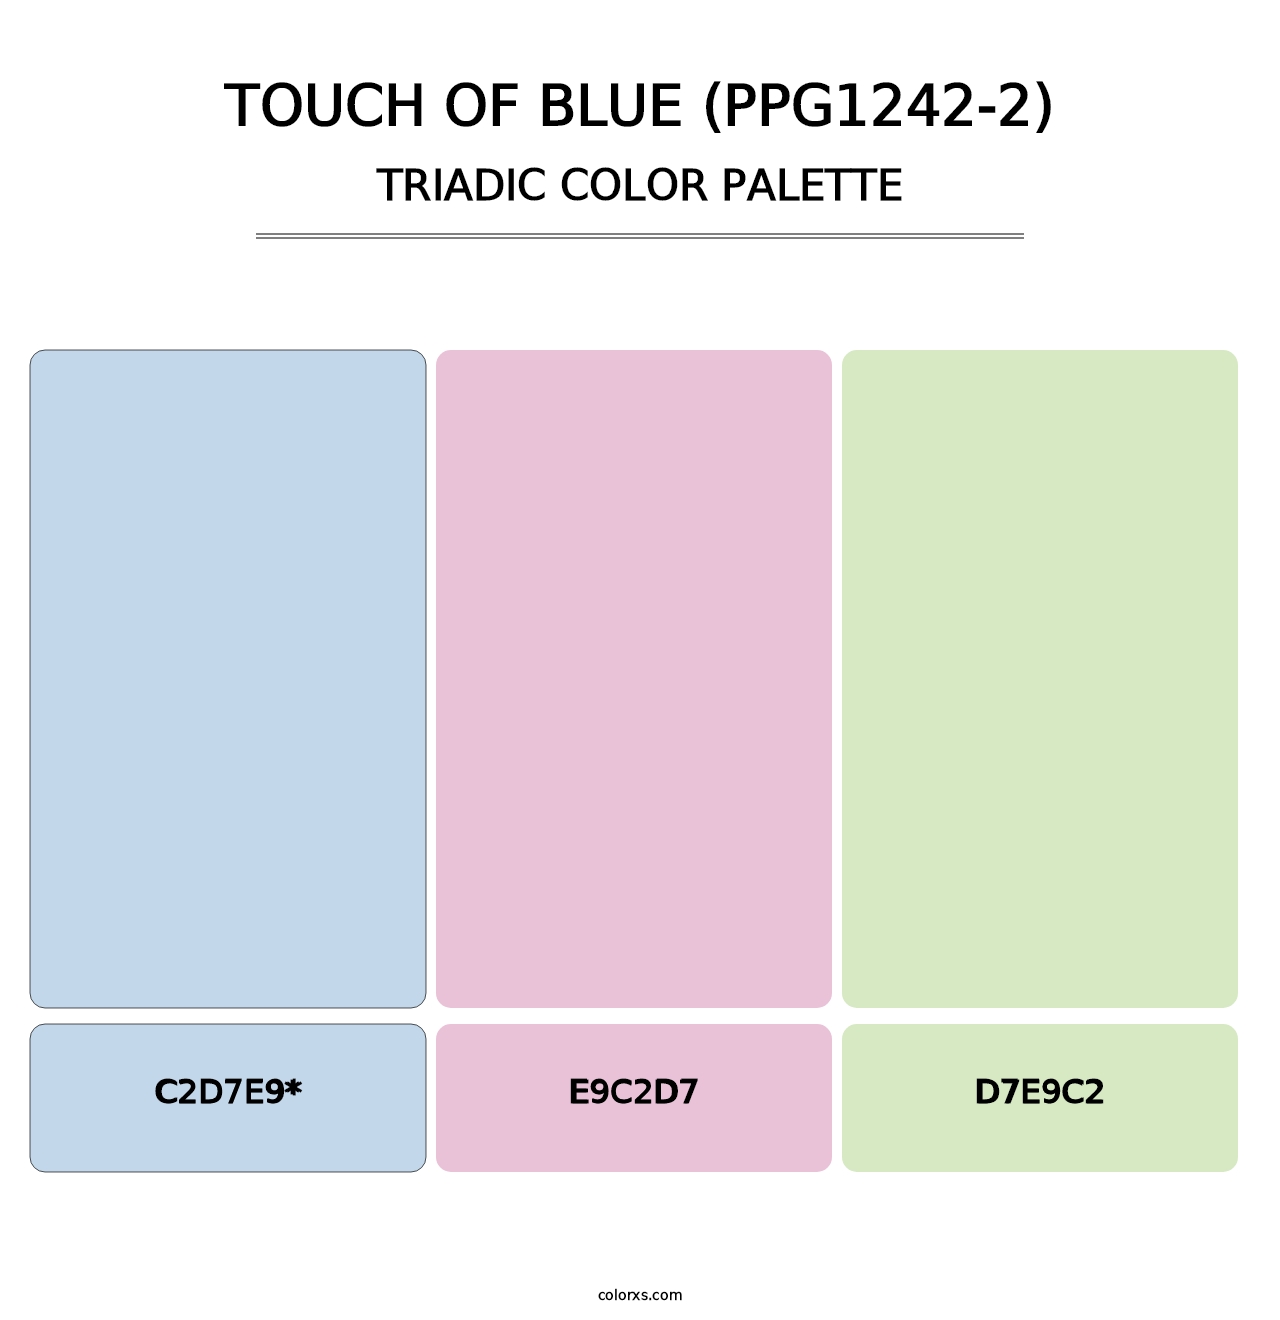 Touch Of Blue (PPG1242-2) - Triadic Color Palette